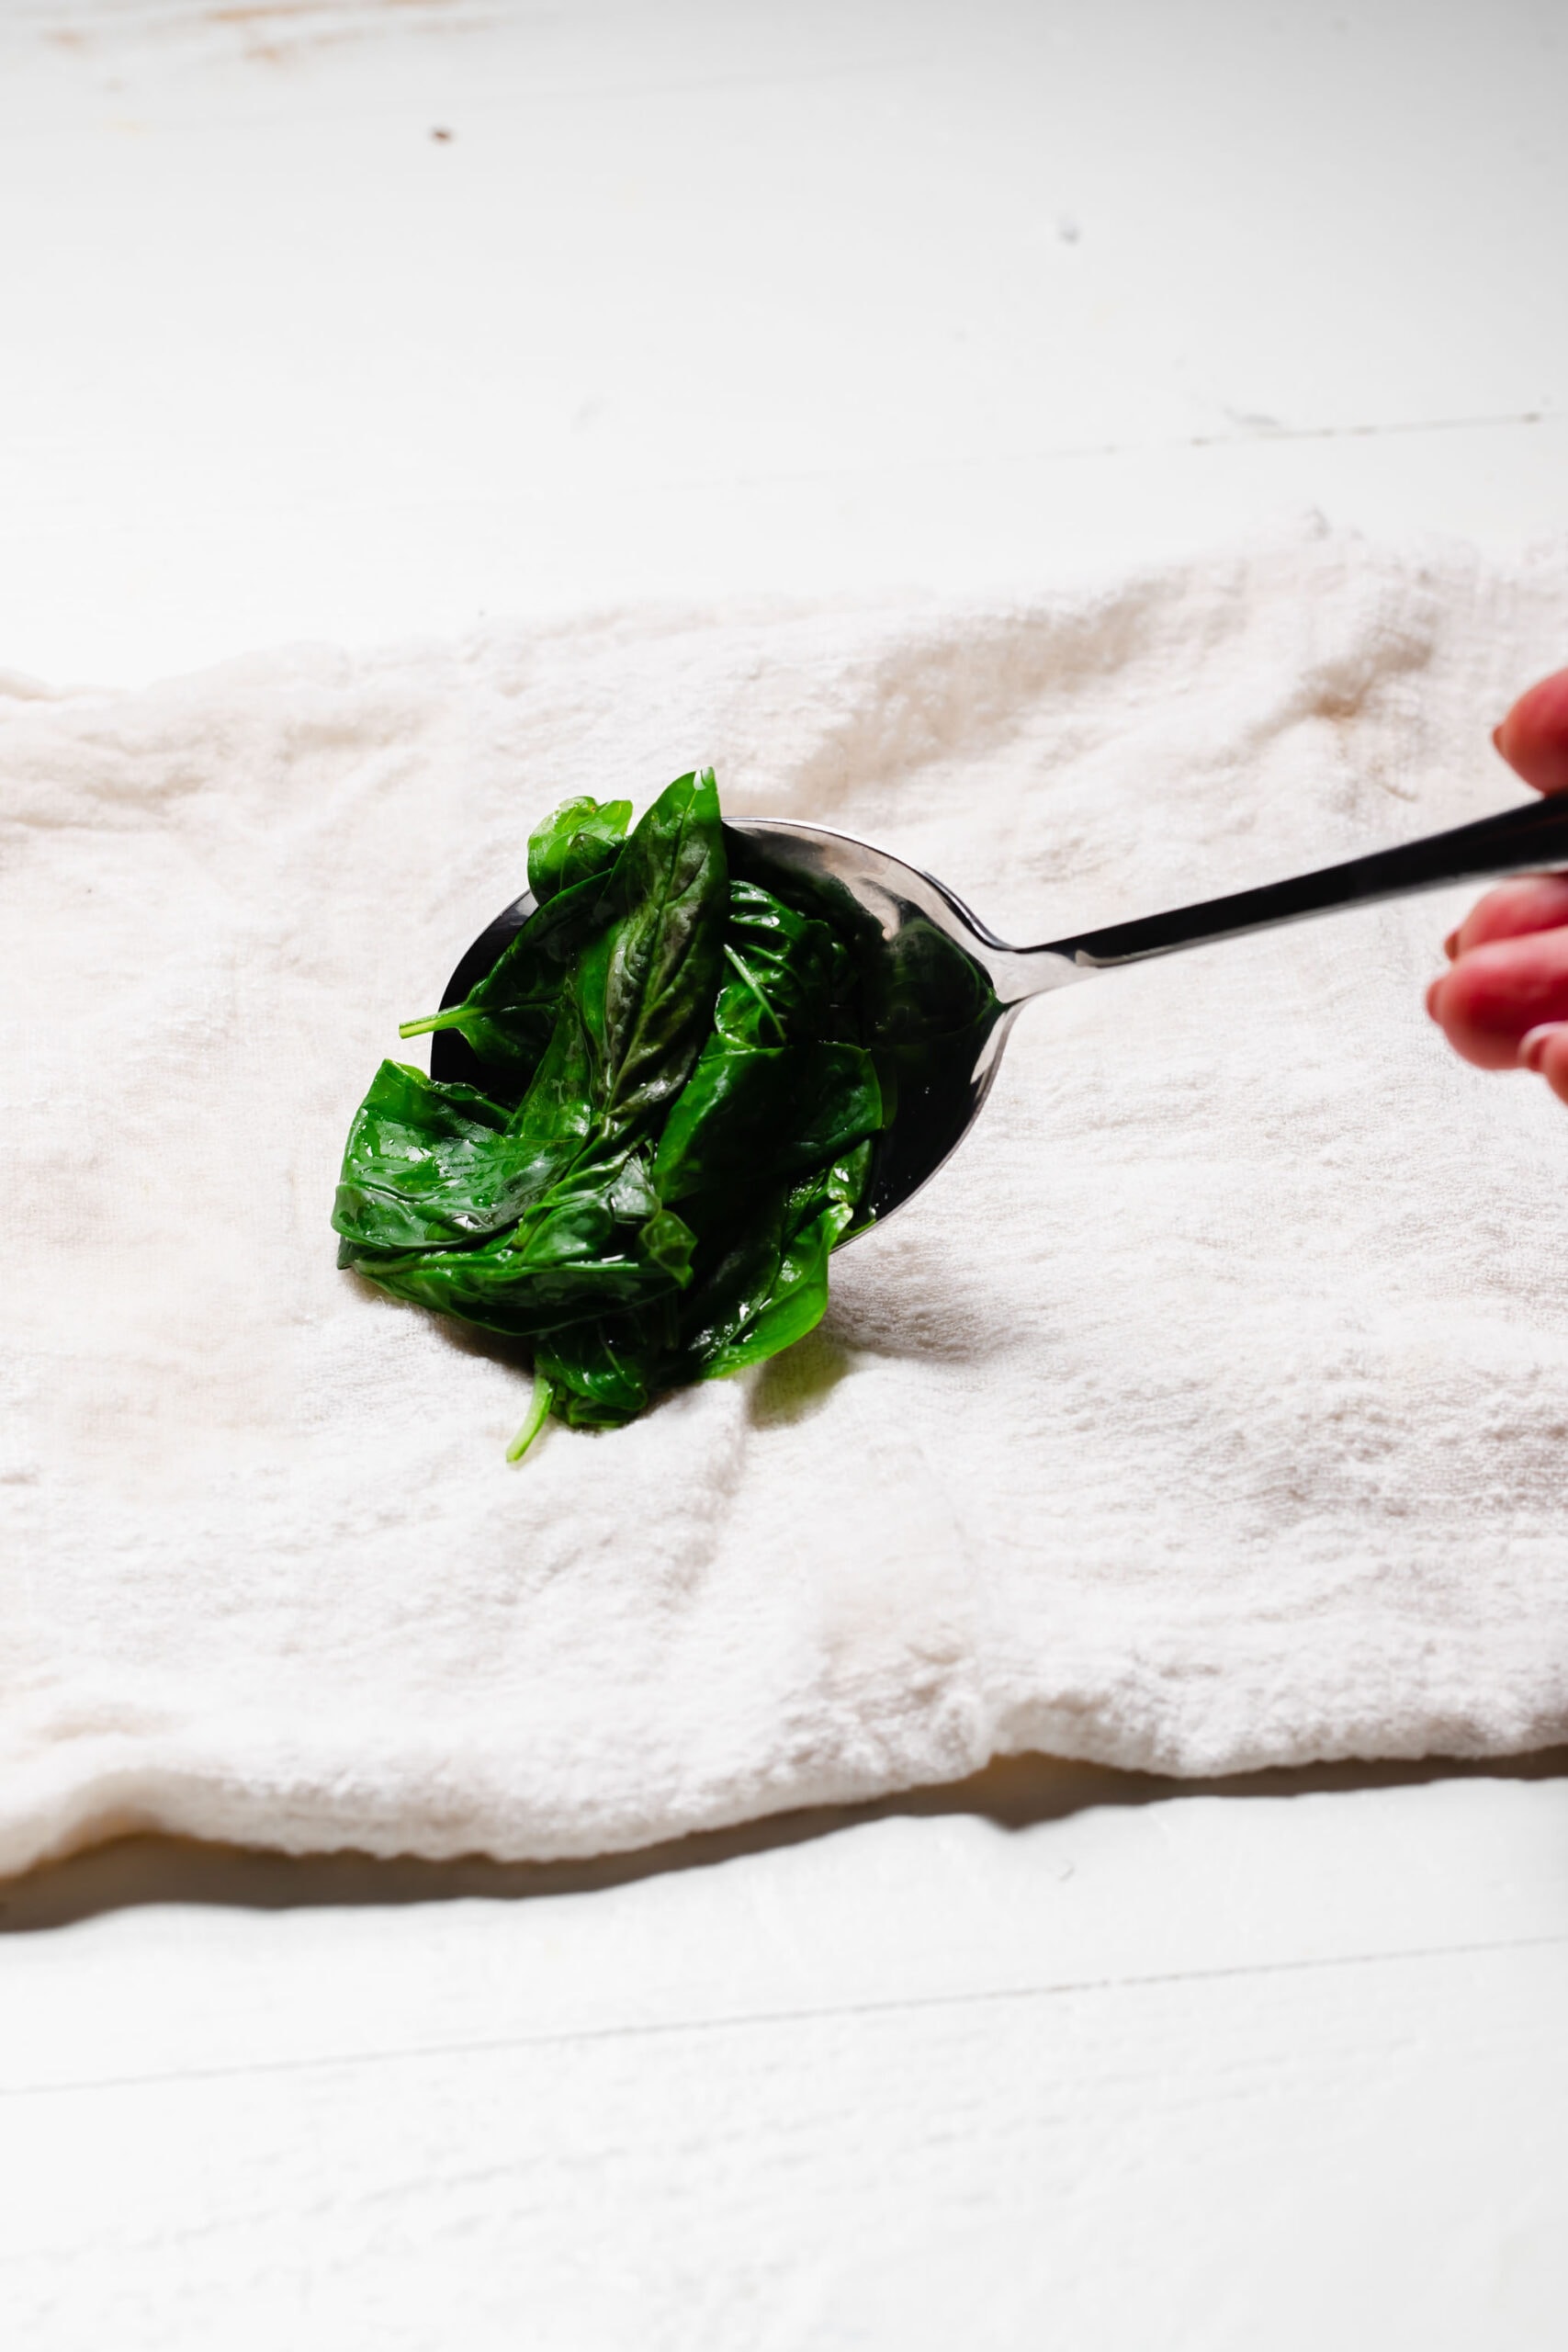 SLOTTED SPOON PLACING BASIL ON TOWEL